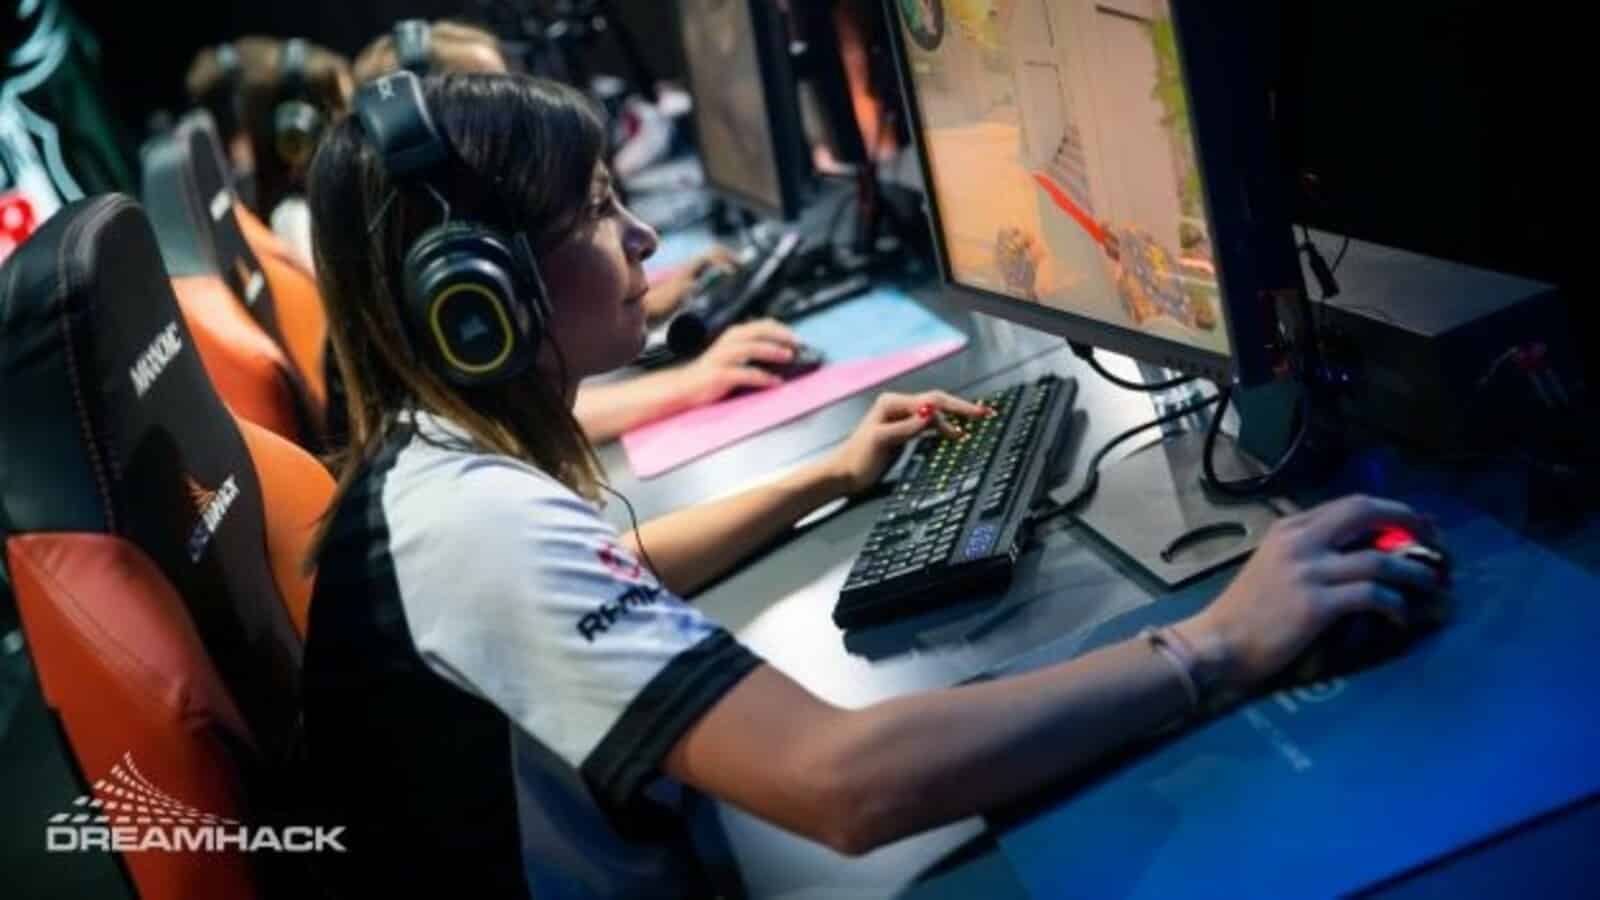 zAAz playing CS on stage at an event